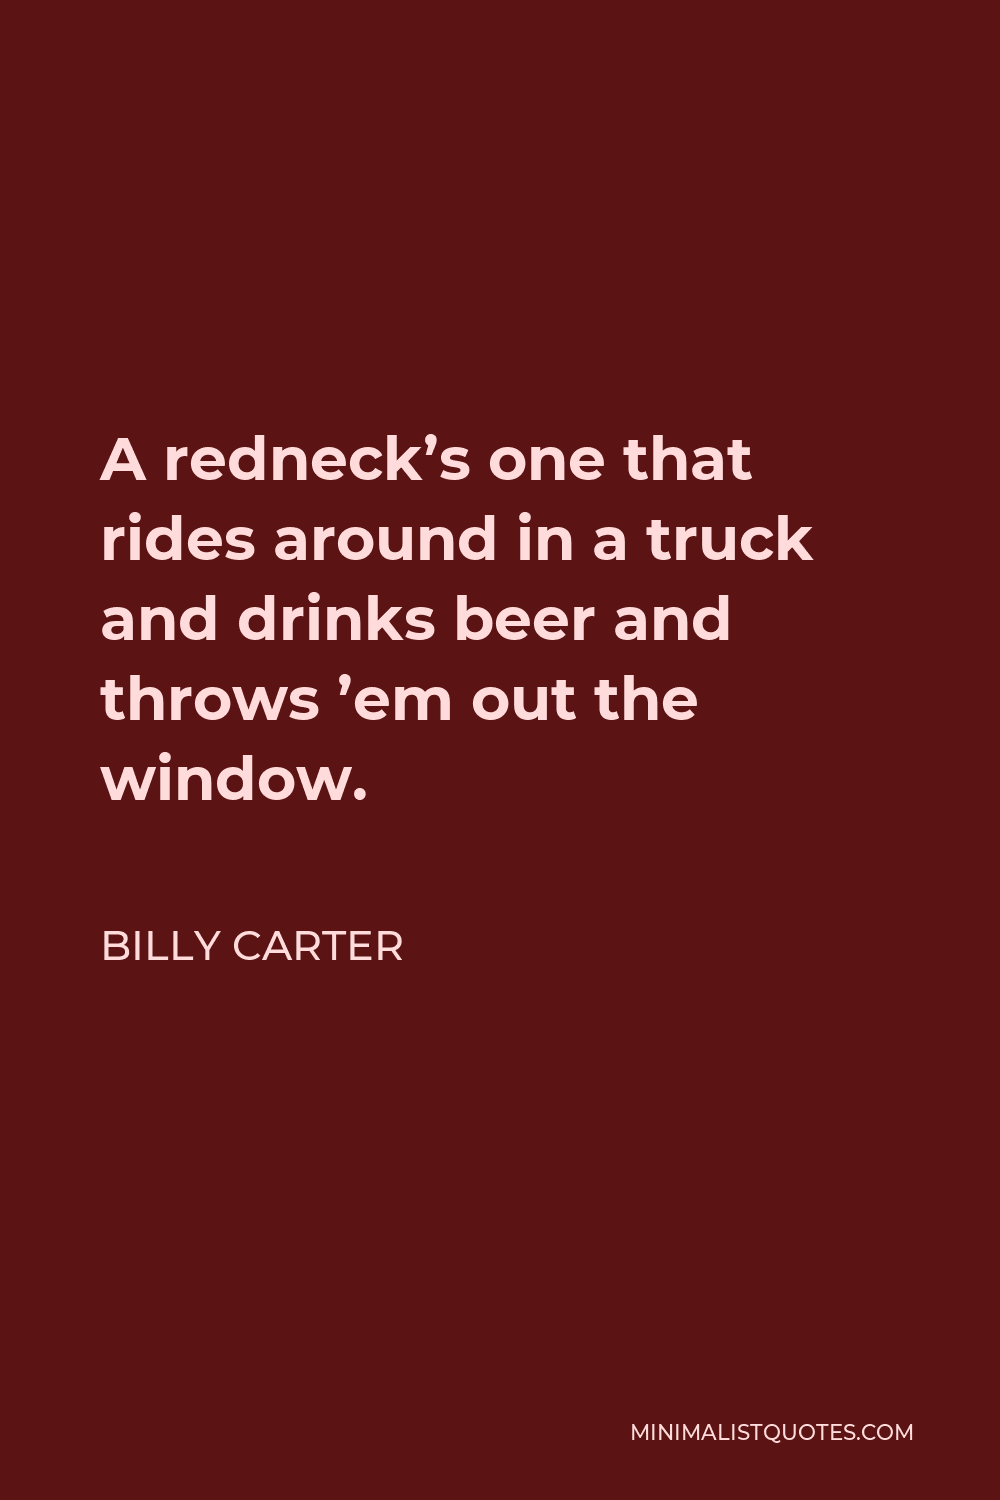 Billy Carter Quote - A redneck’s one that rides around in a truck and drinks beer and throws ’em out the window.